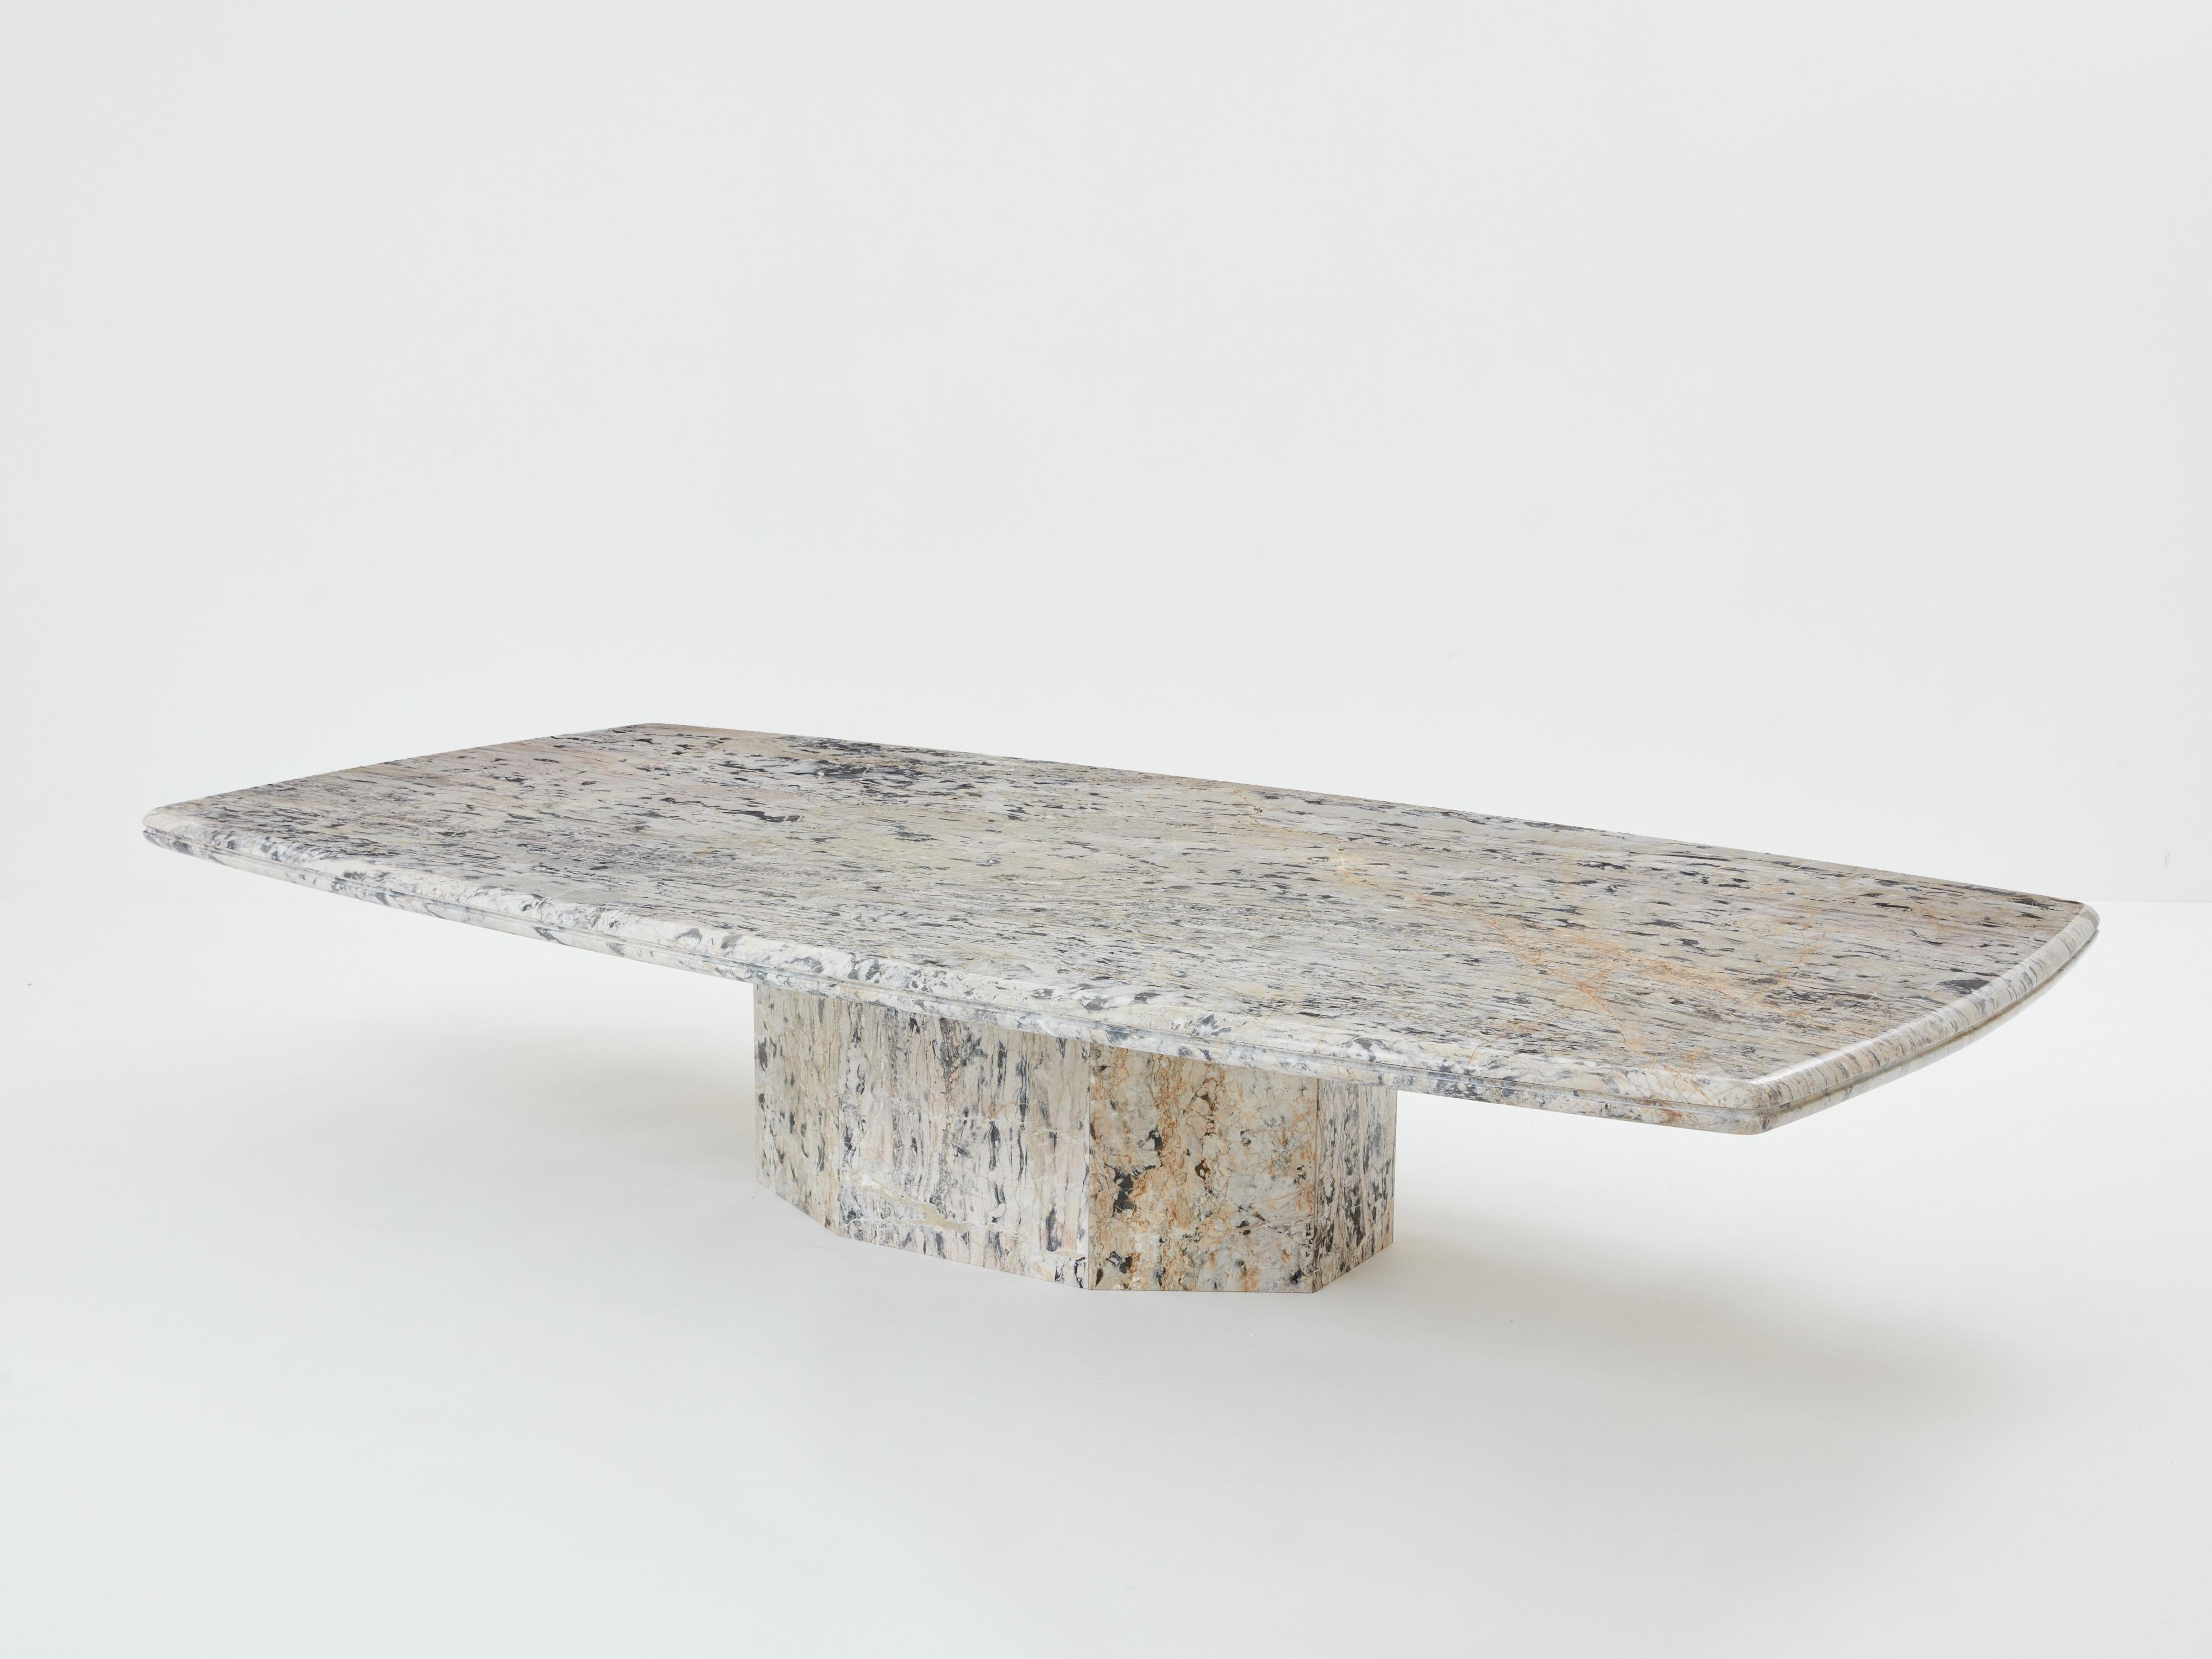 This beautiful and extra large coffee table was made in France in the early 1970s from a beautiful Sicilian greige marble. The thick surface of this coffee table is so slick yet intriguing, and will be the statement piece of the living room. The